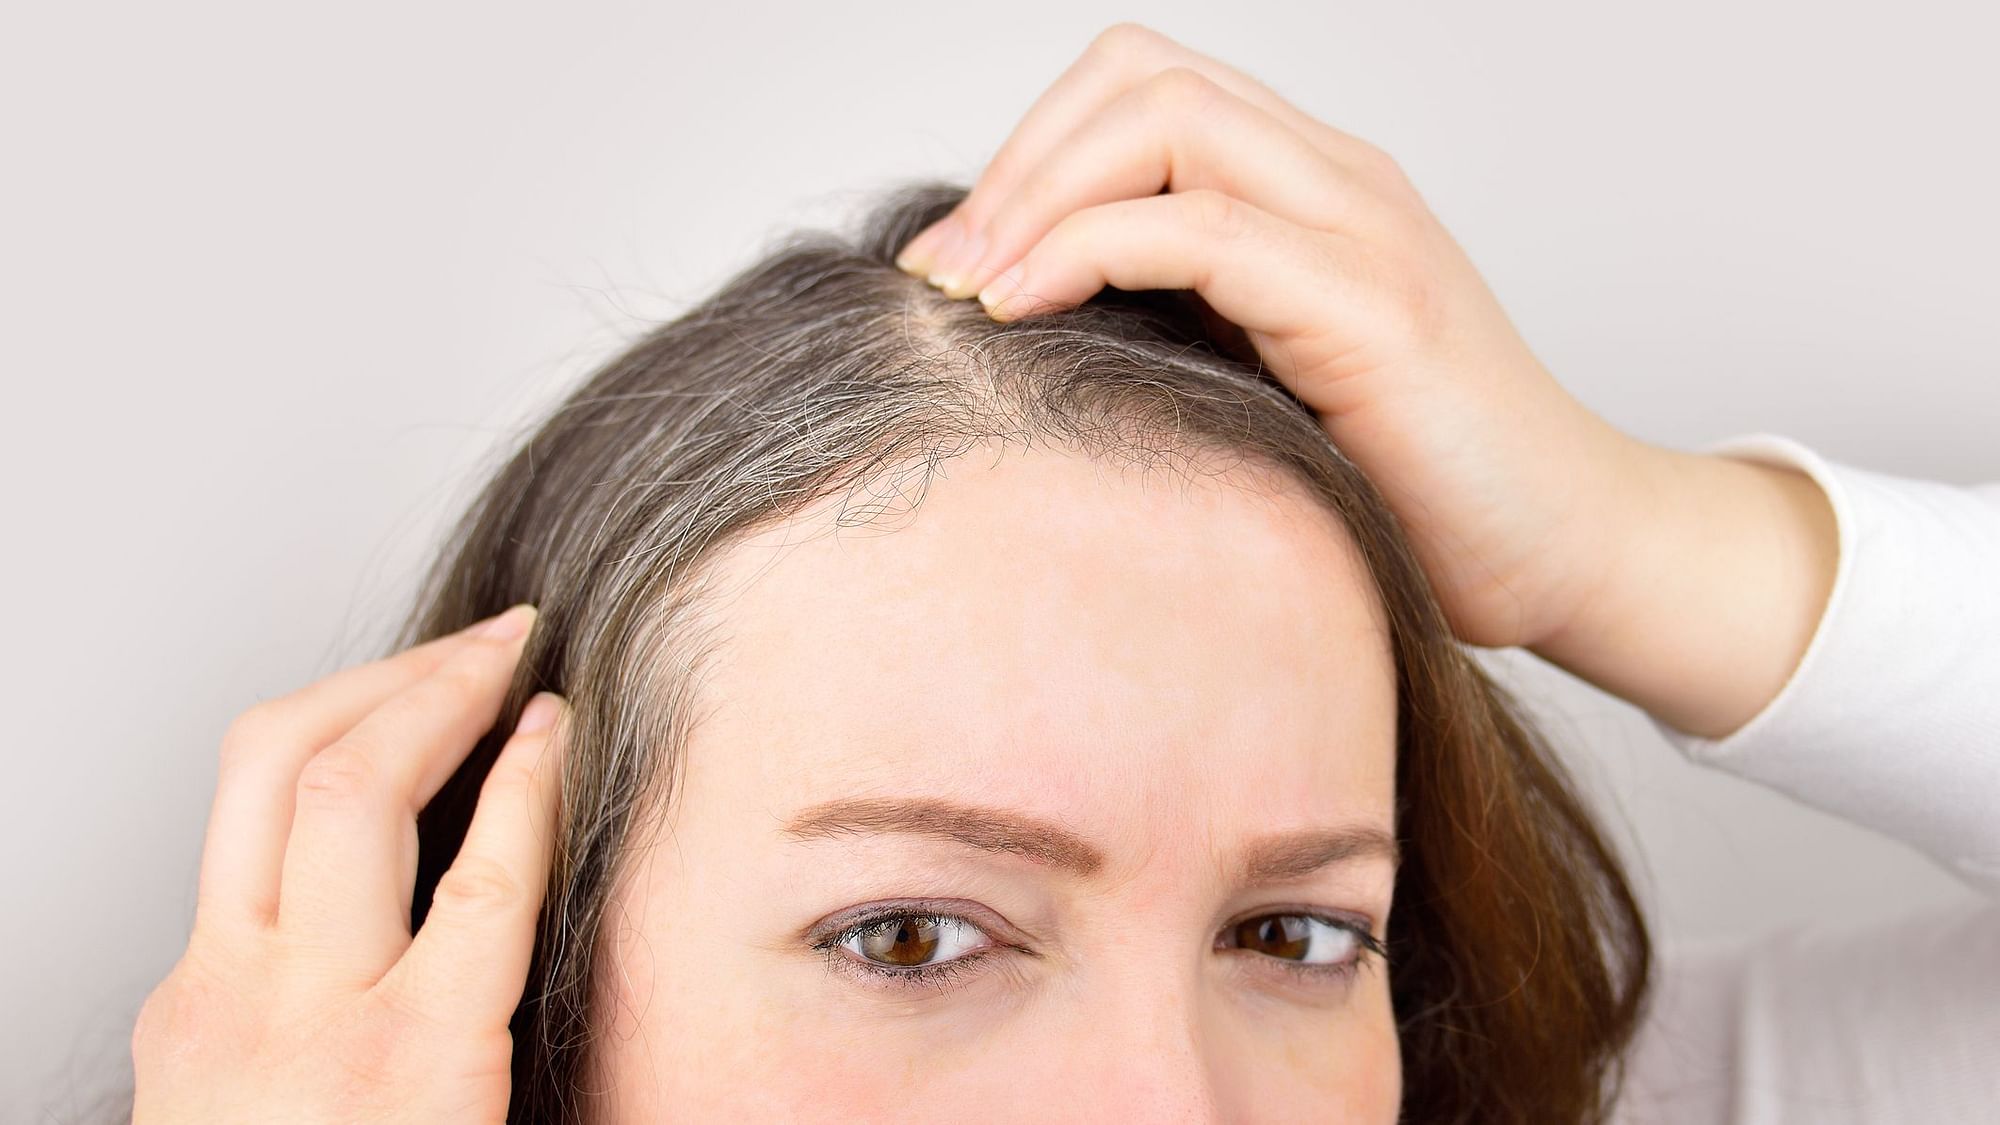 Struggling with Premature Greying? Ayurveda May Be Able to Help